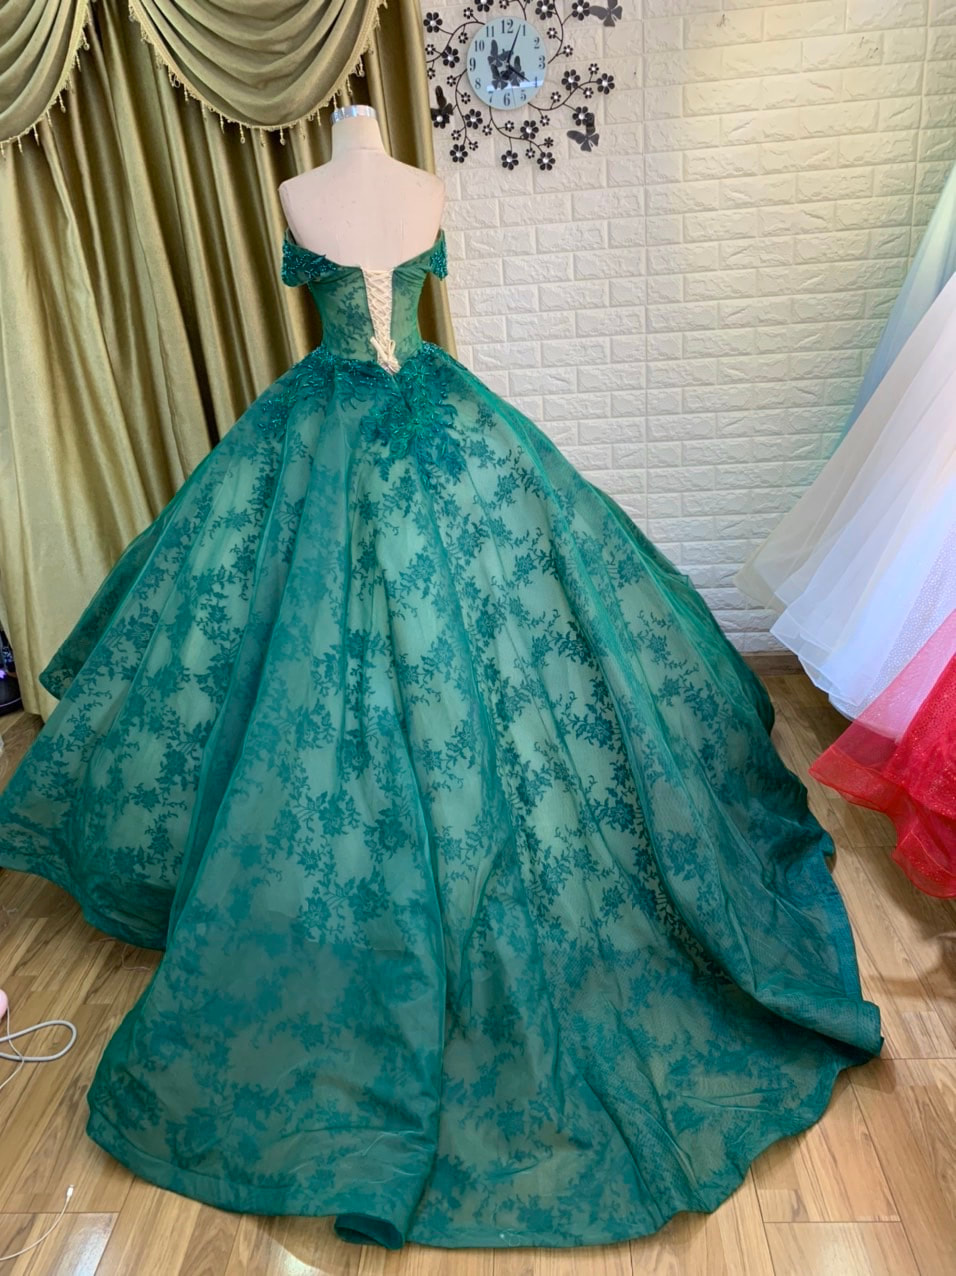 Shades of green - off the shoulder lace ball gown wedding/prom dress ...